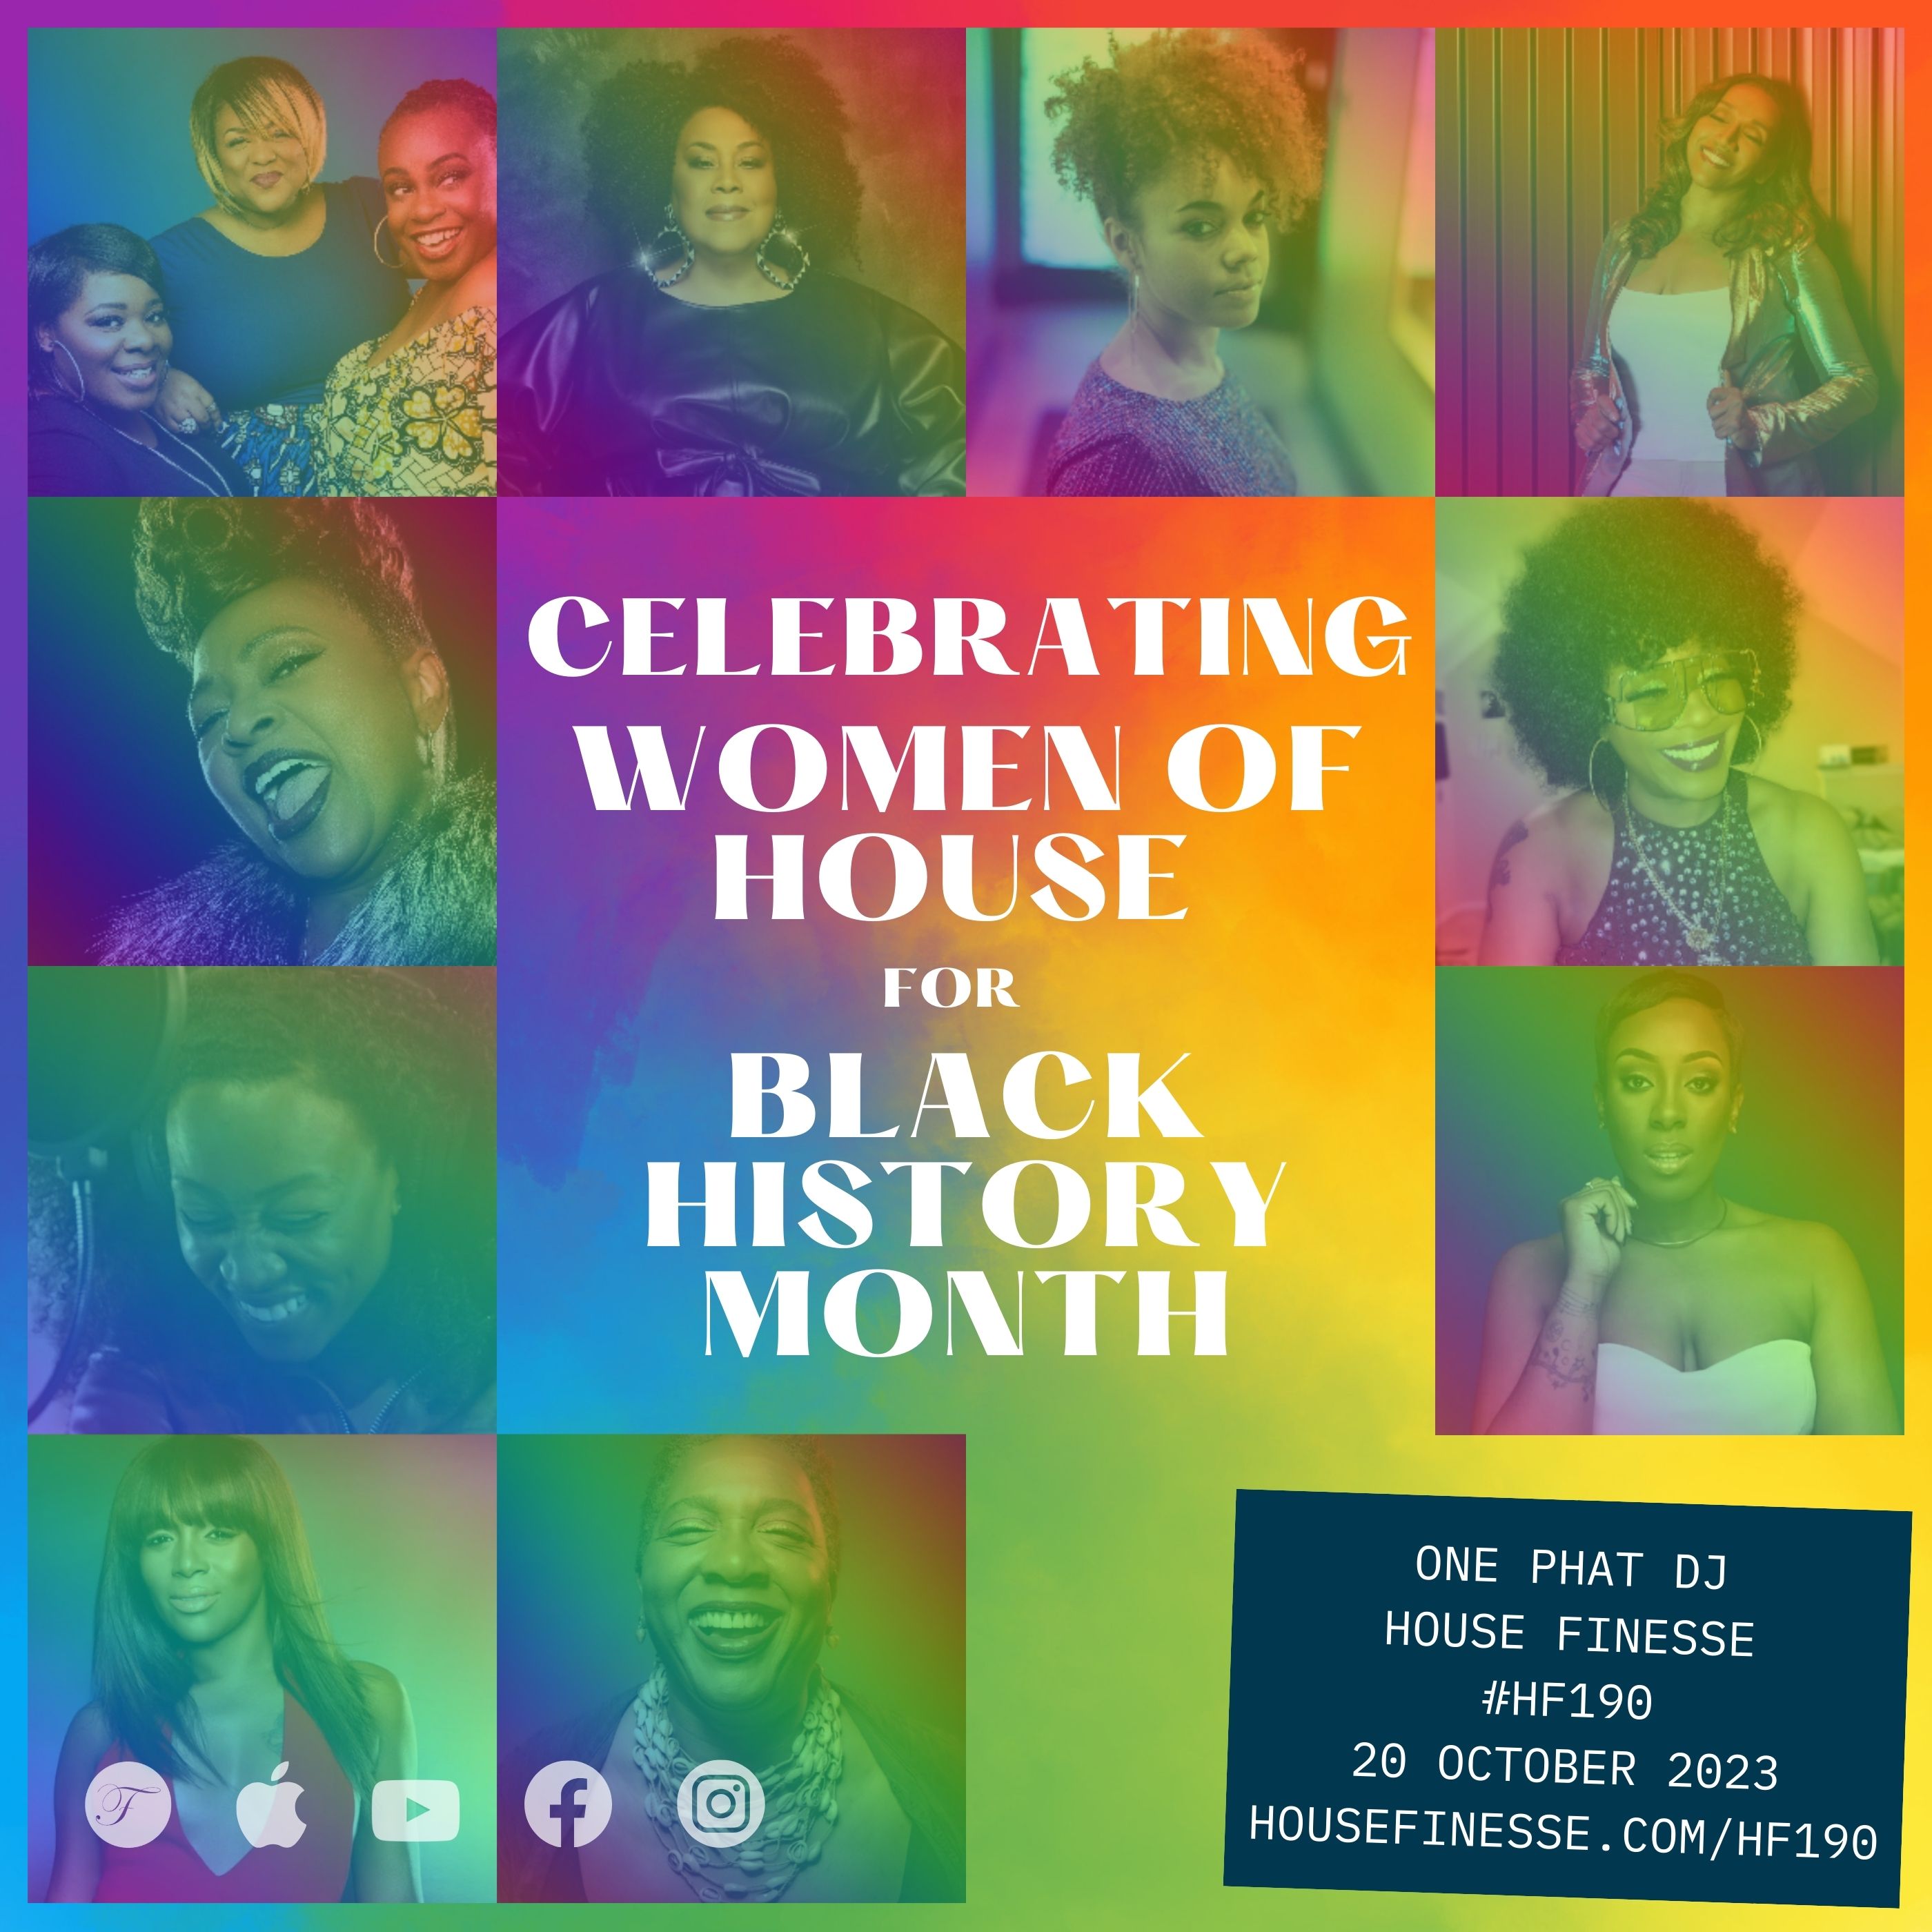 Celebrating Women of House for Black History Month with One Phat DJ